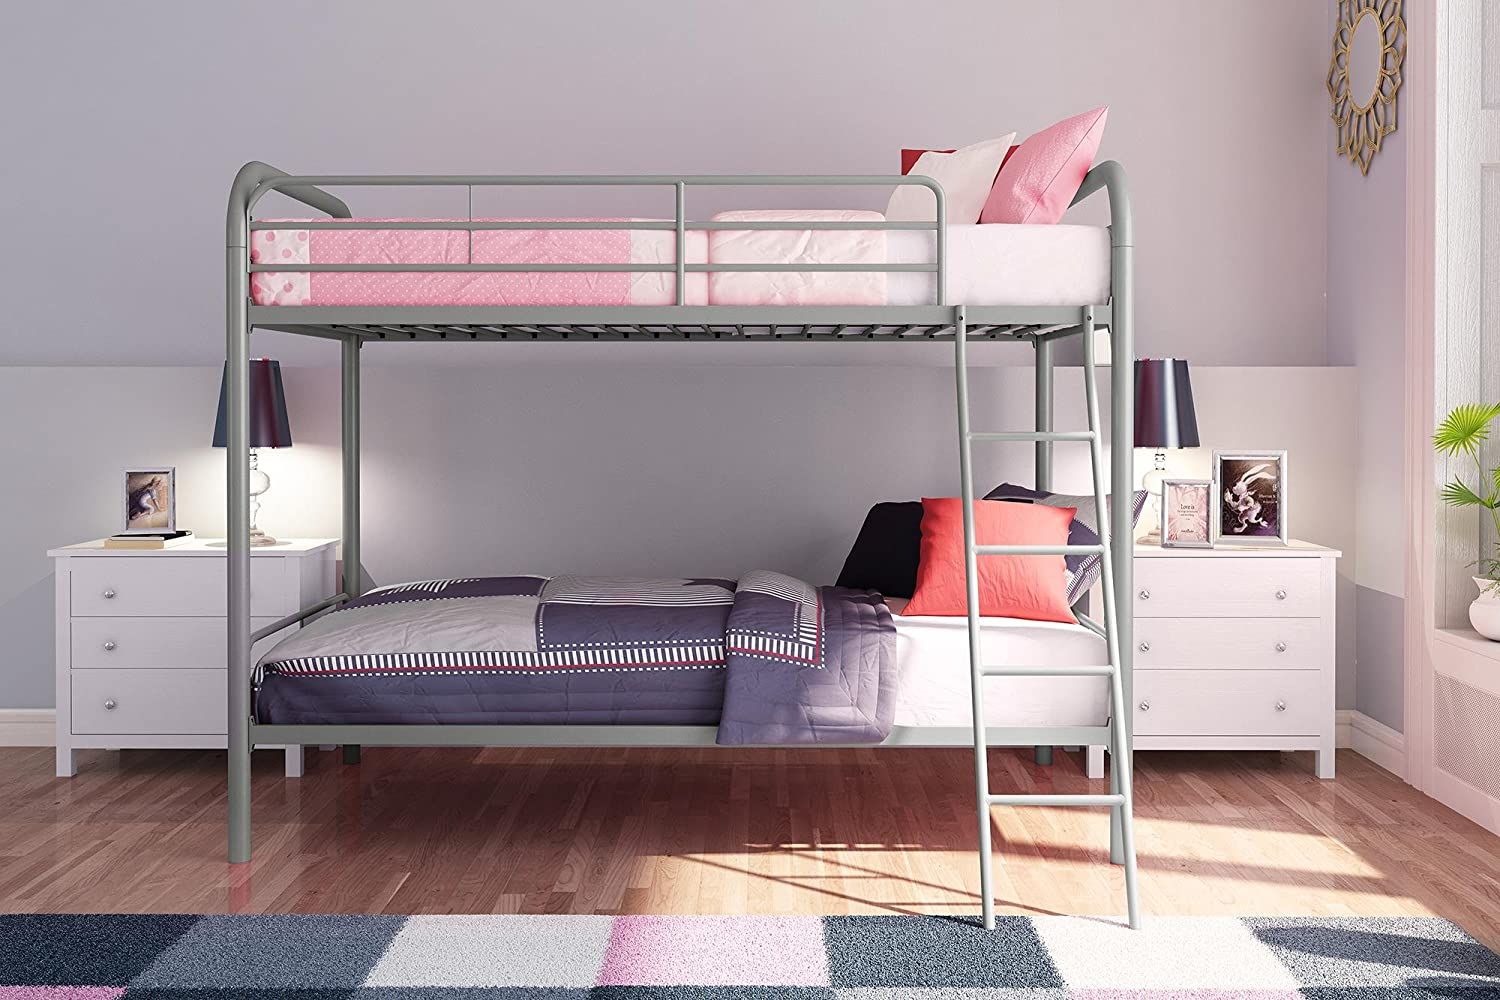 8 Best Bunk Beds 2020 The Strategist, Rooms To Go Childrens Bunk Beds